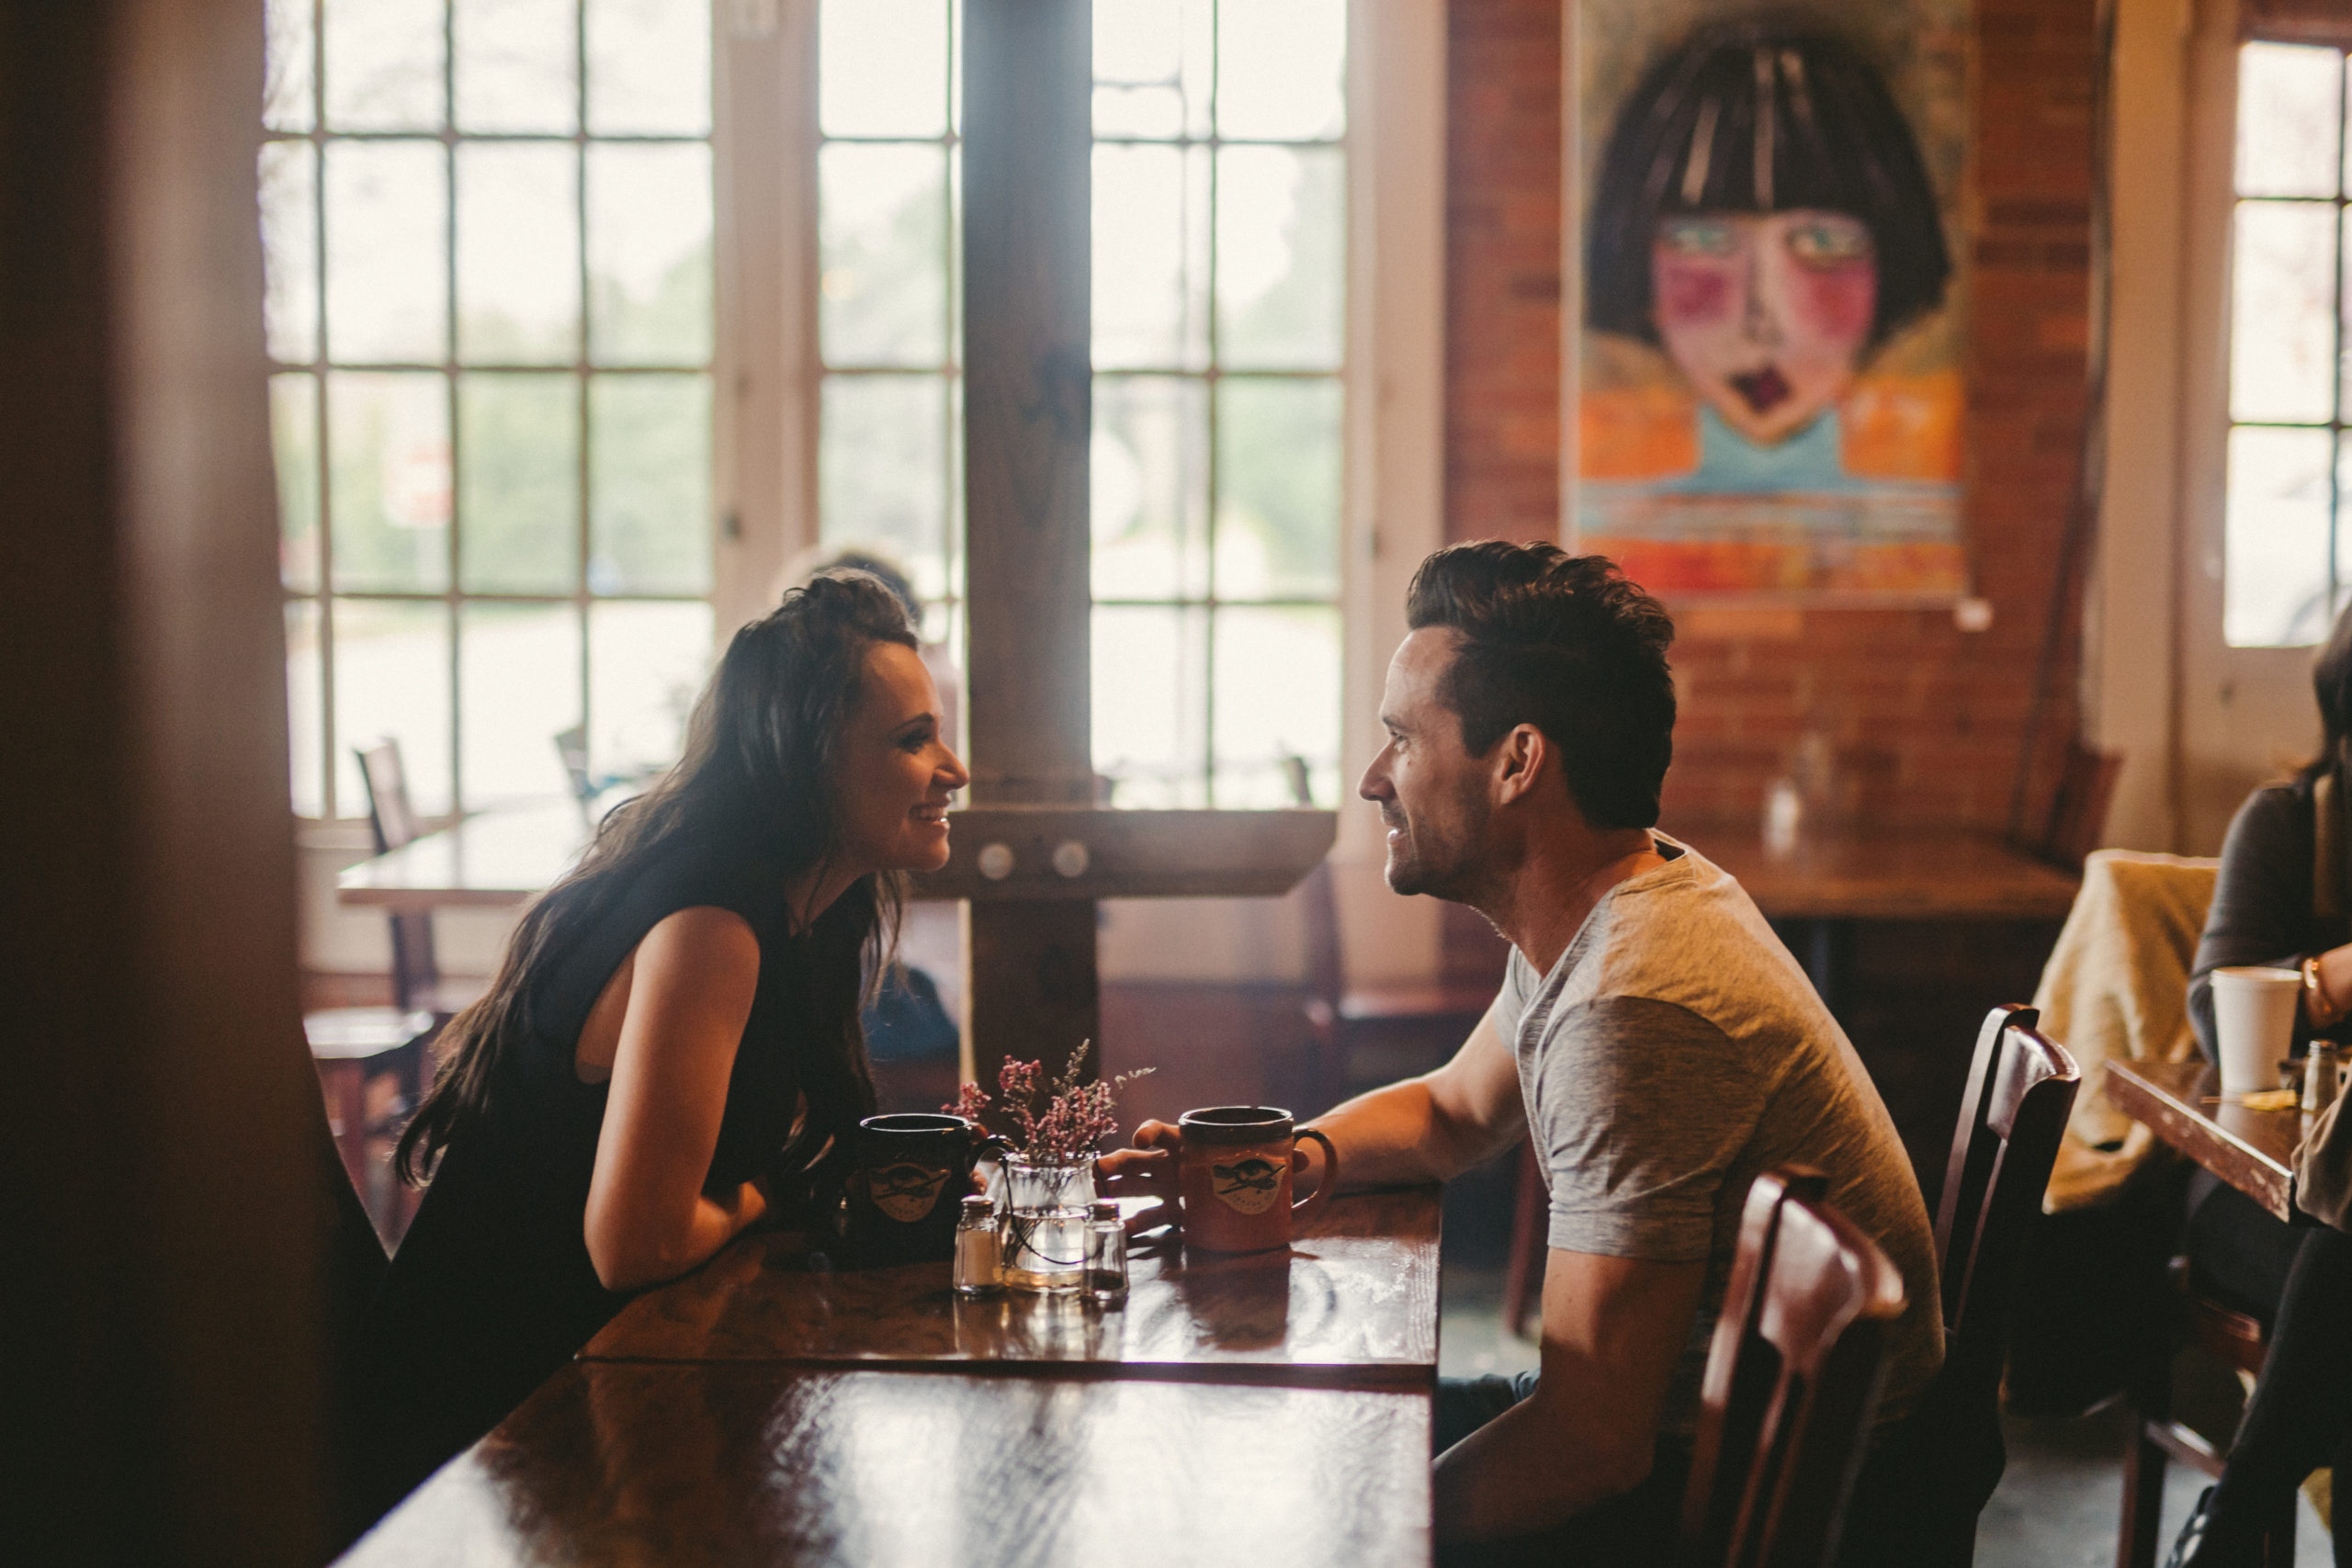 JSM Man and woman looking at each other over a table in a restaurant